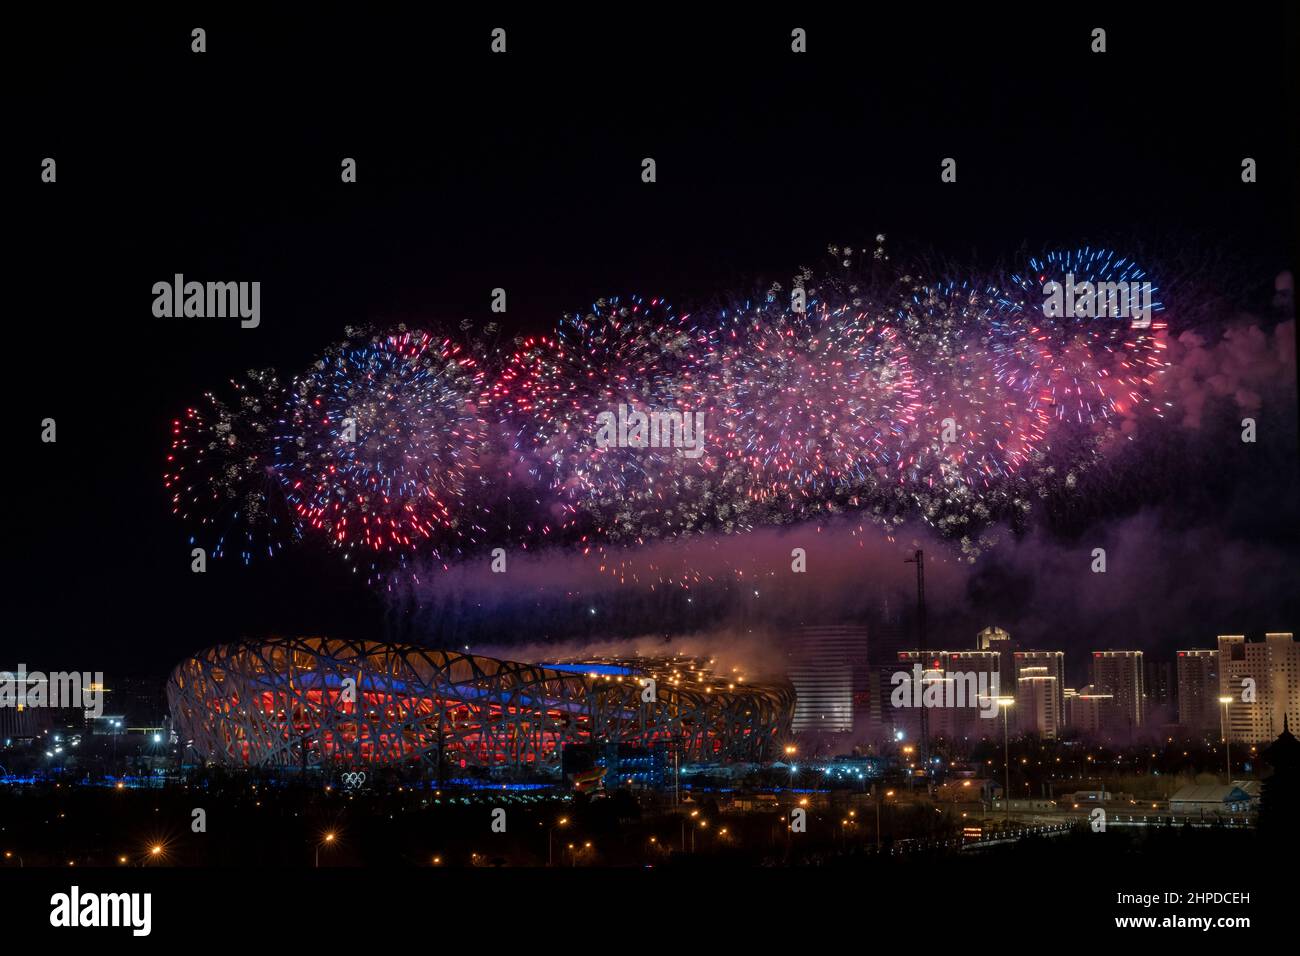 BEIJING, CHINA - FEBRUARY 20, 2022 - Fireworks performance during the closing ceremony of the 2022 Beijing Winter Olympic Games at National Stadium on Stock Photo